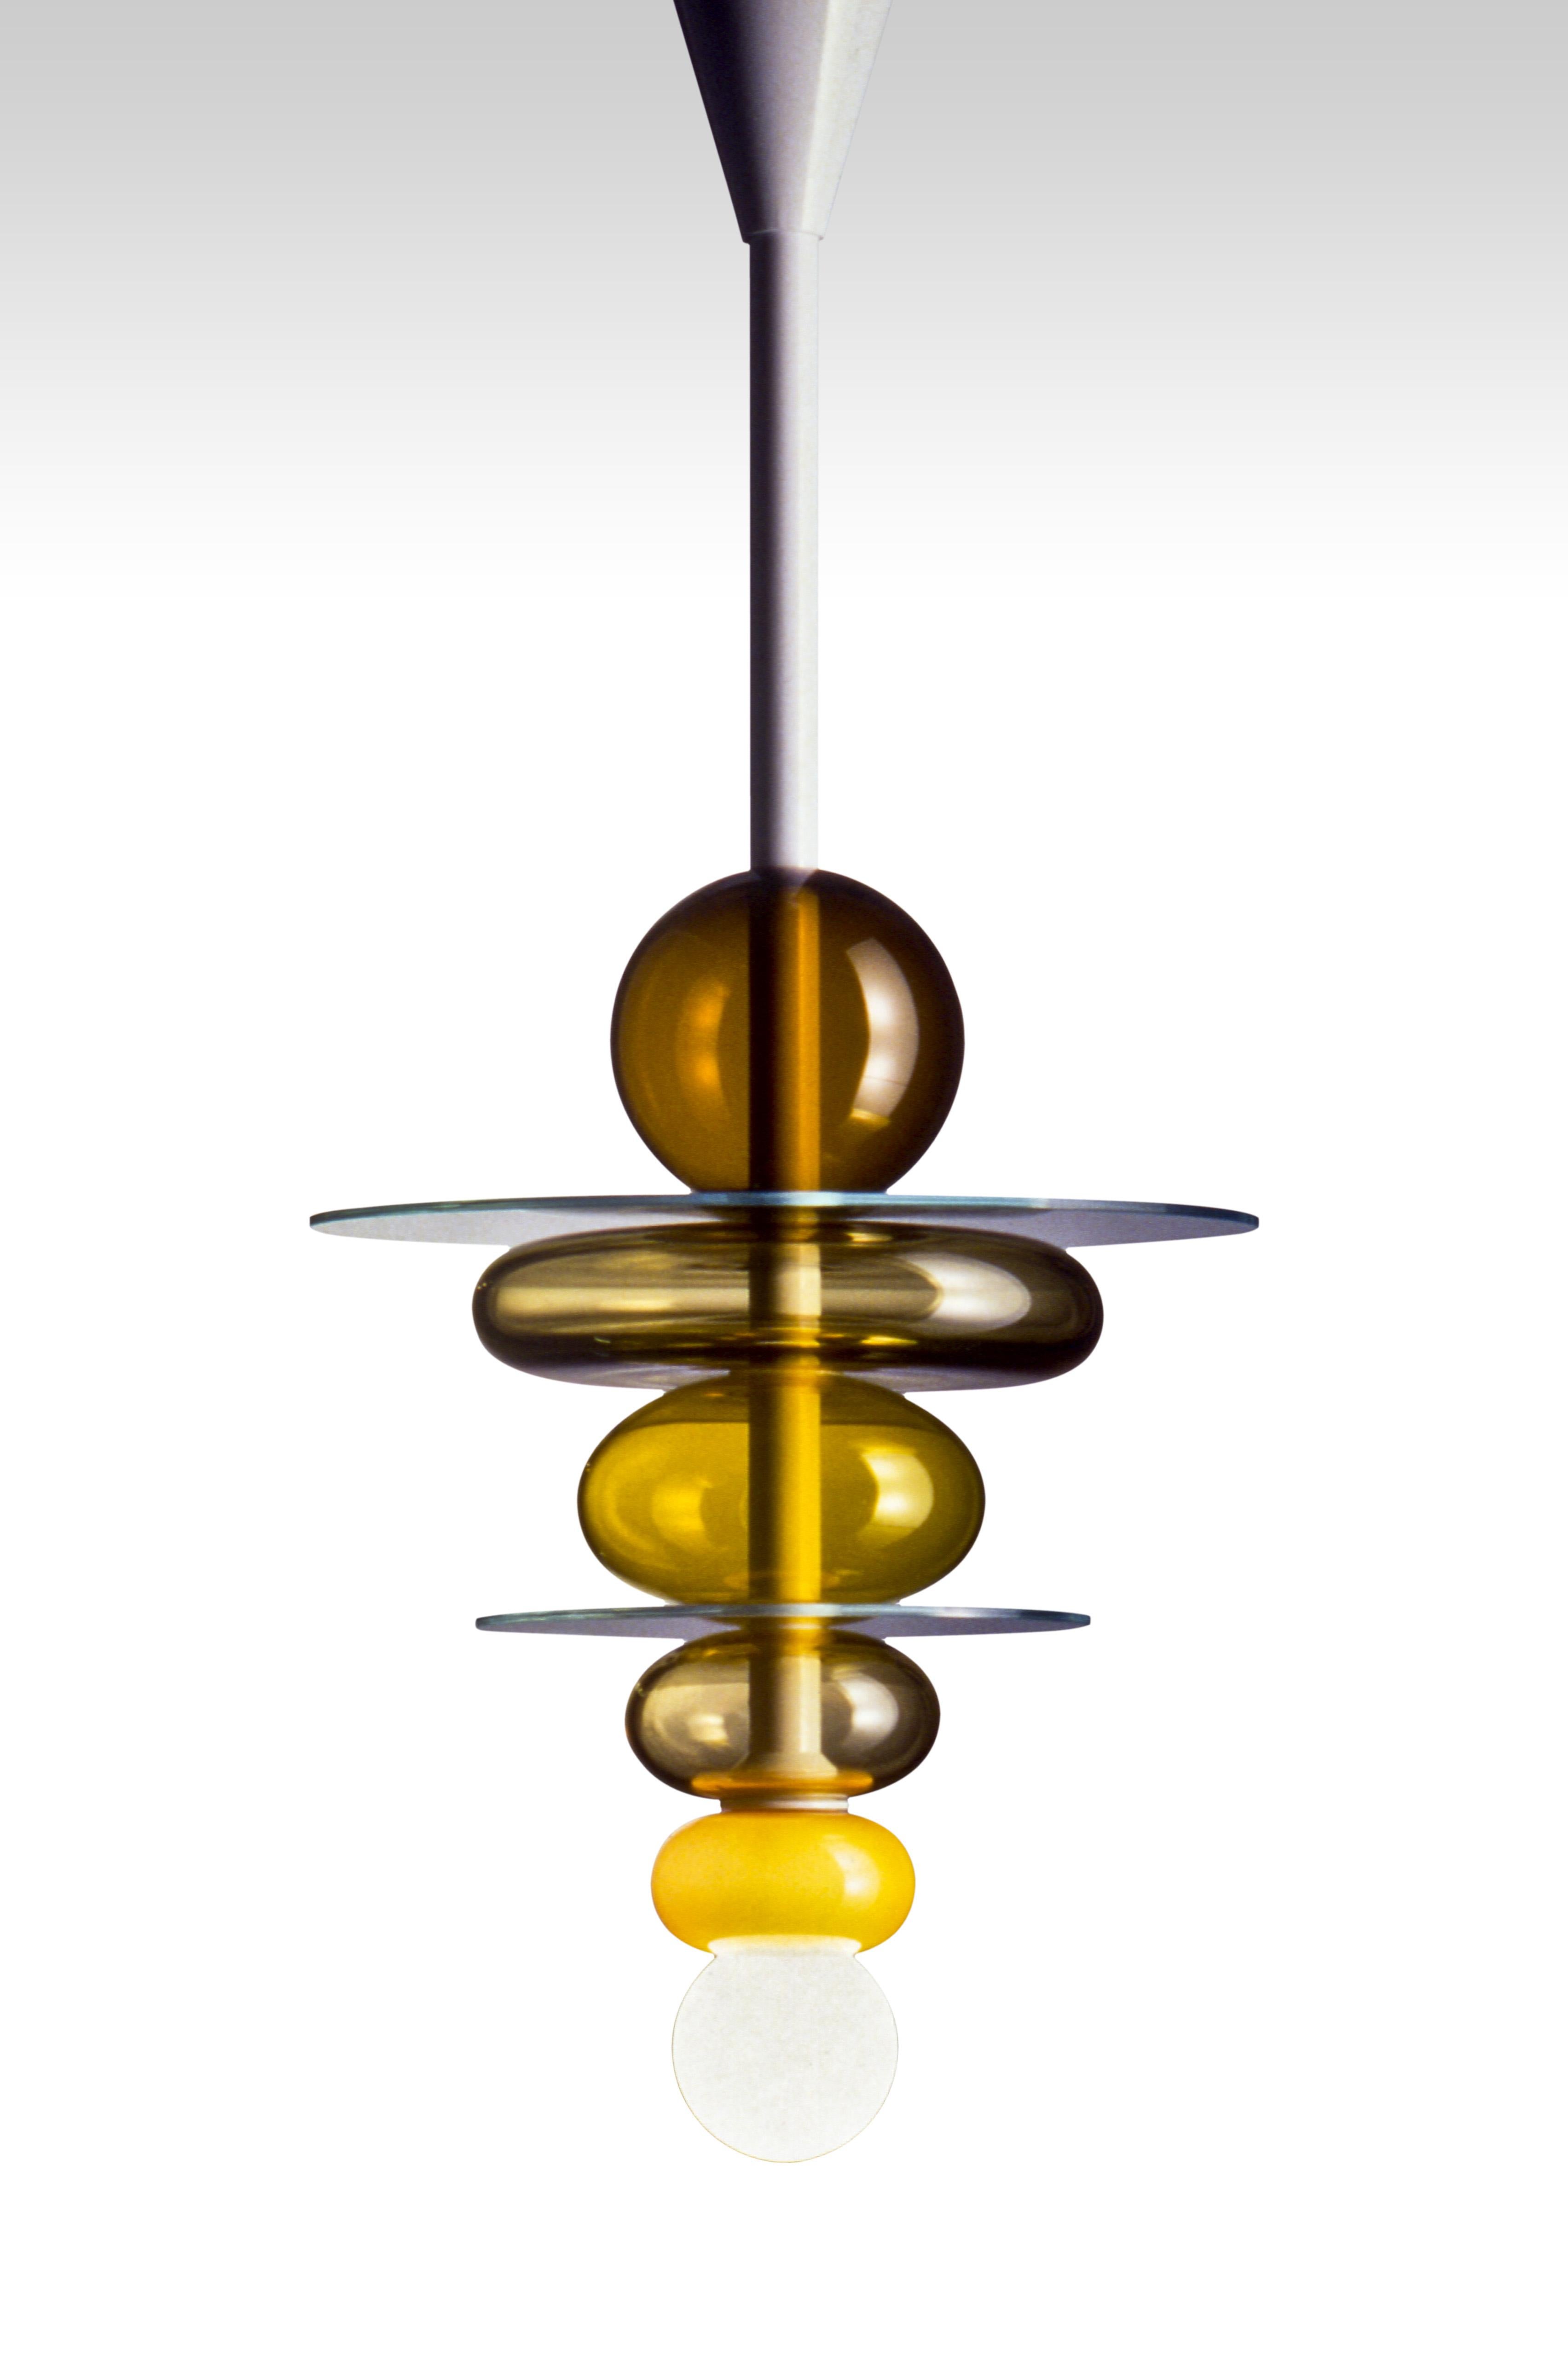 Firenze suspension lamp, designed by Ettore Sottsass and manufactured by Venini, features handmade blown glass colored elements and crystal color discs. Numbered edition. Indoor use only.

Dimensions: Ø 40 cm, H 80 cm.